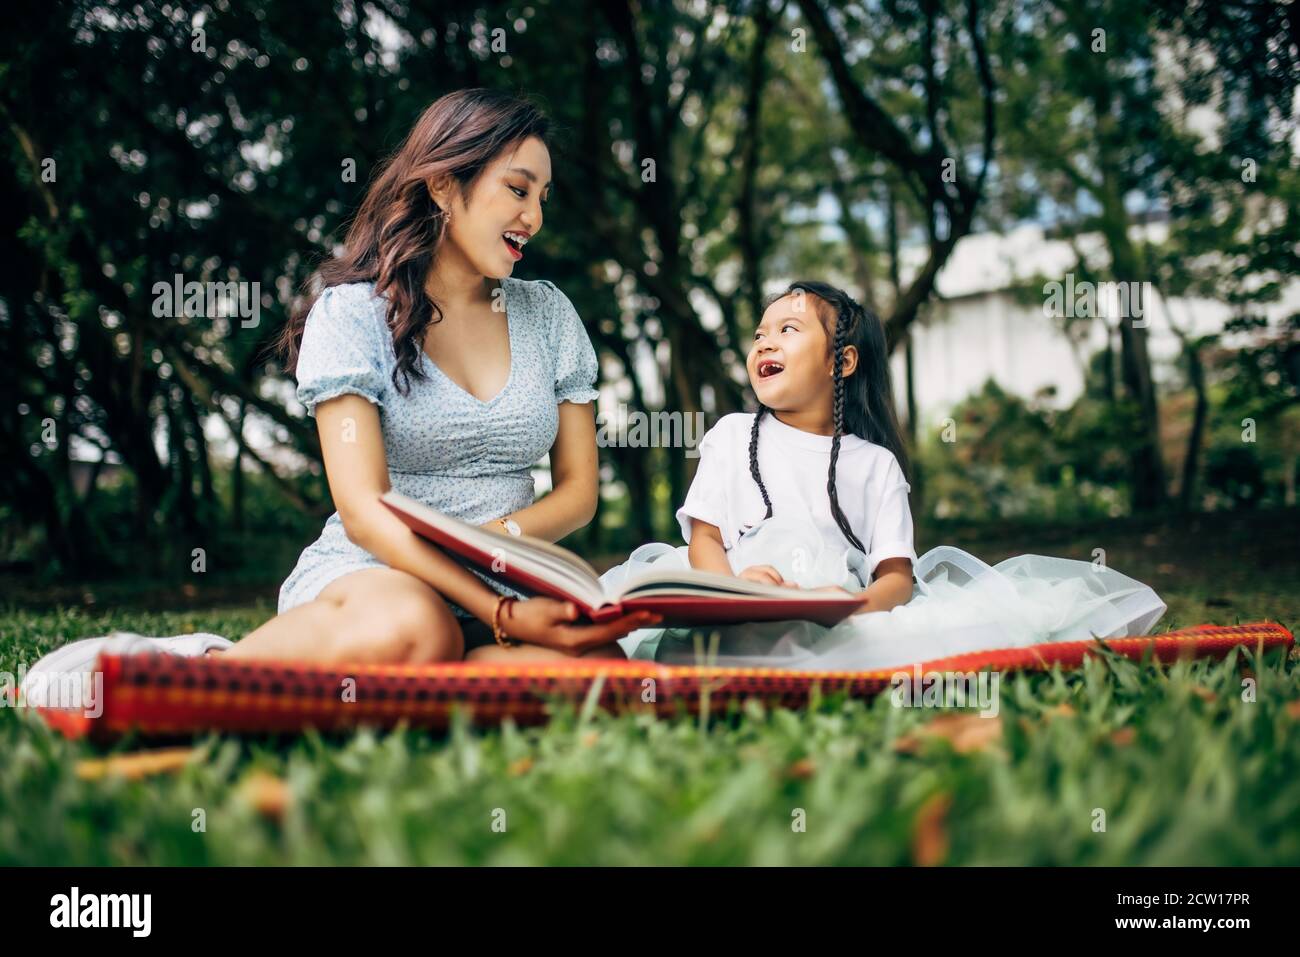 Two beautiful ladies. The oldest teaching the youngest during a picnic session. Stock Photo